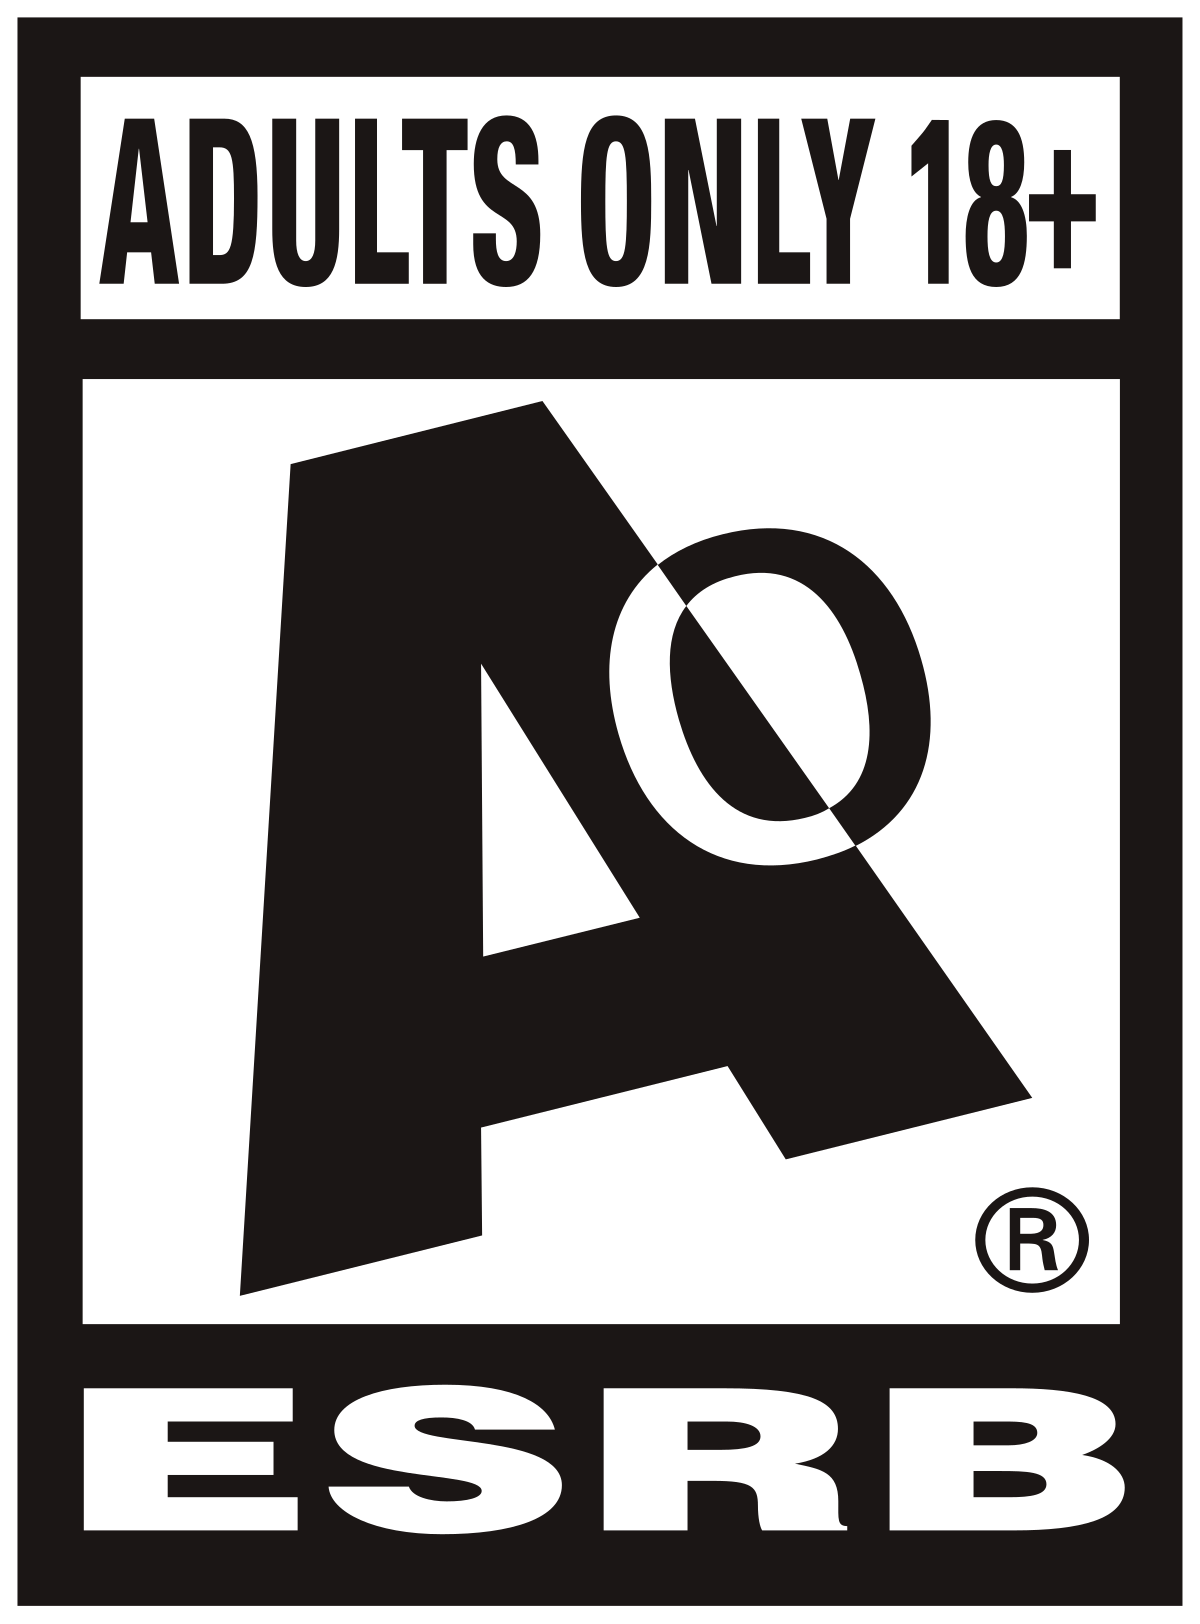 ESRB Logo - List Of AO Rated Video Games